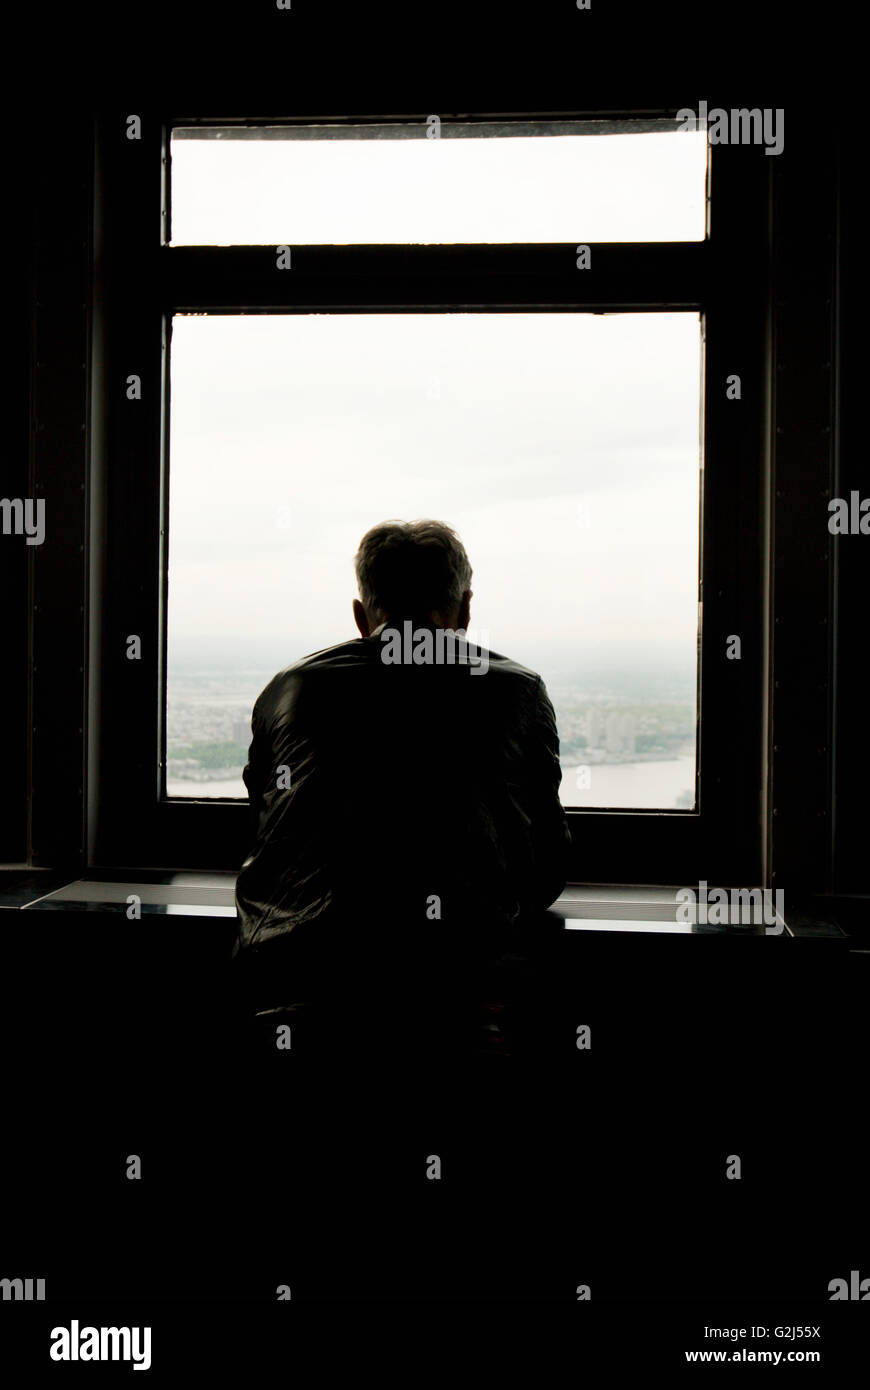 Silhouetted Man Looking Out Window Stock Photo